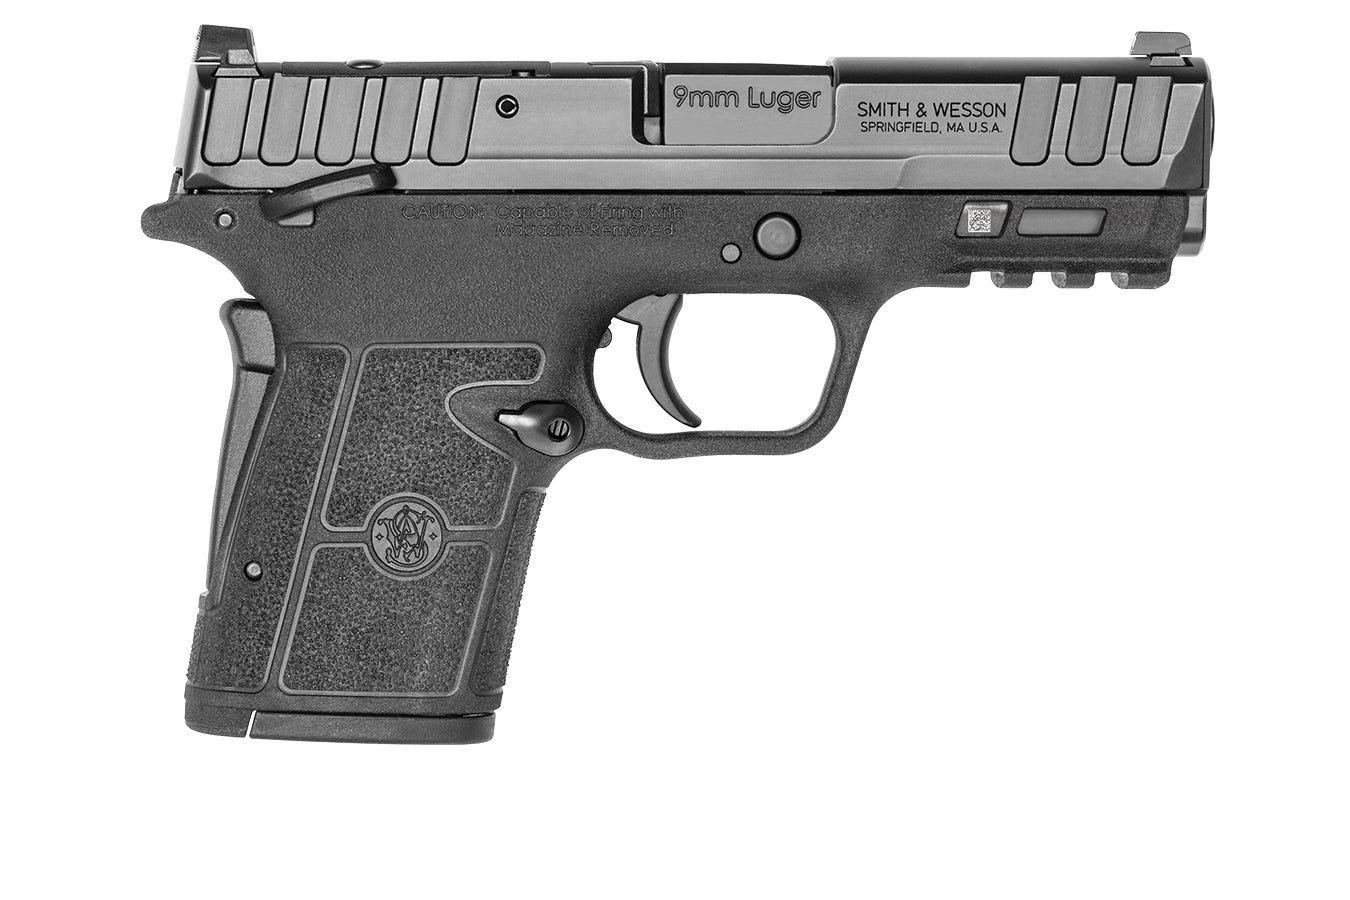 Smith and Wesson Equalizer 9mm 3.6" Barrel 15-Rounds Thumb Safety - $449.99 (grab a quote) + shipped after code "GAGSHIPOFF22"